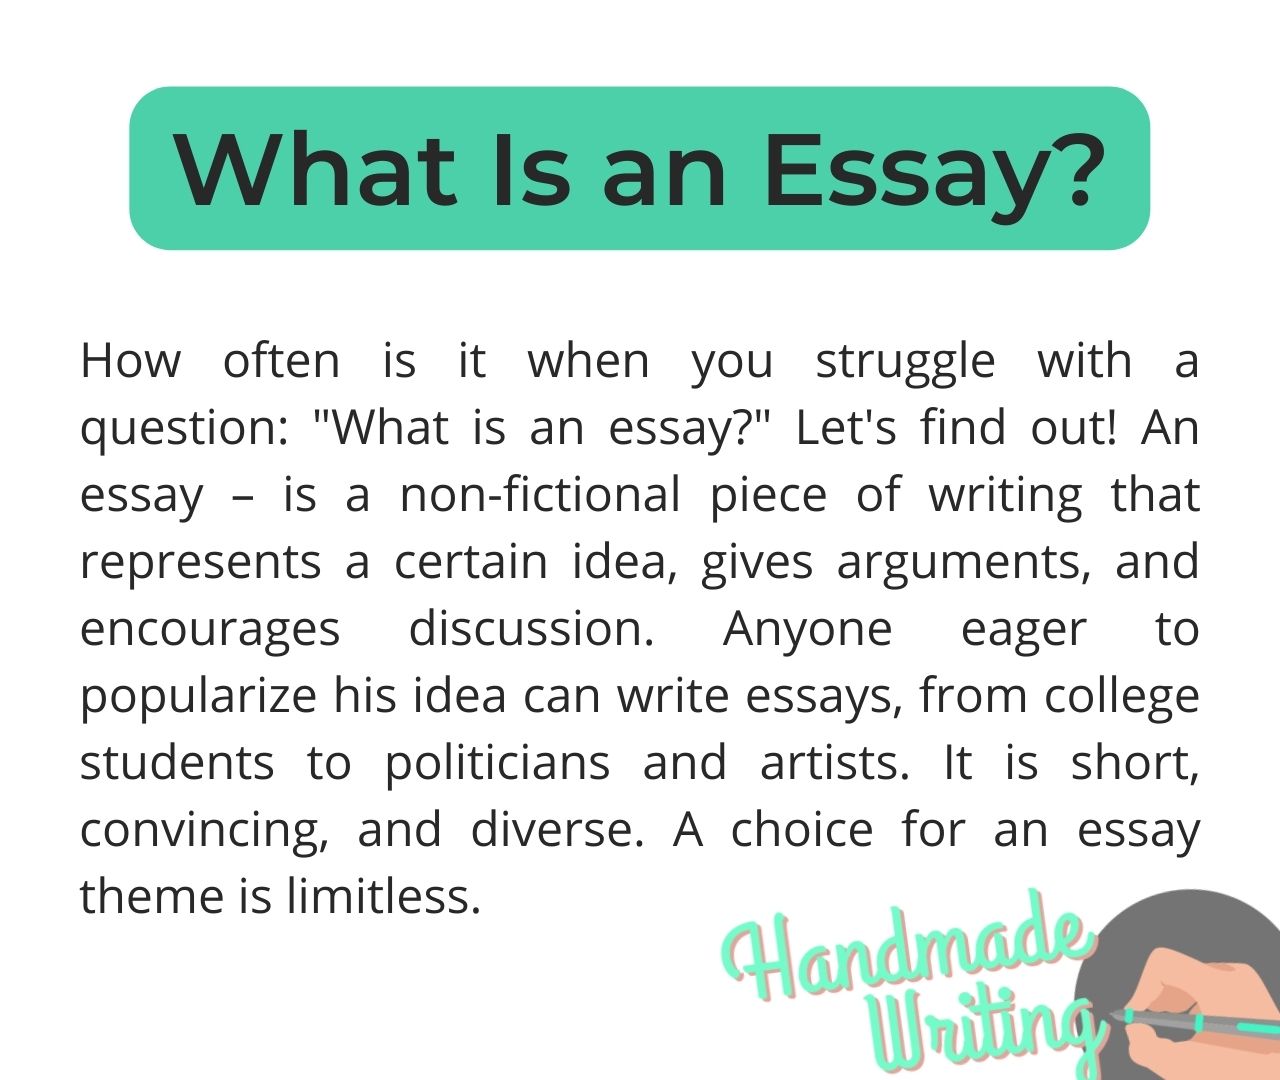 an essay is written in which form